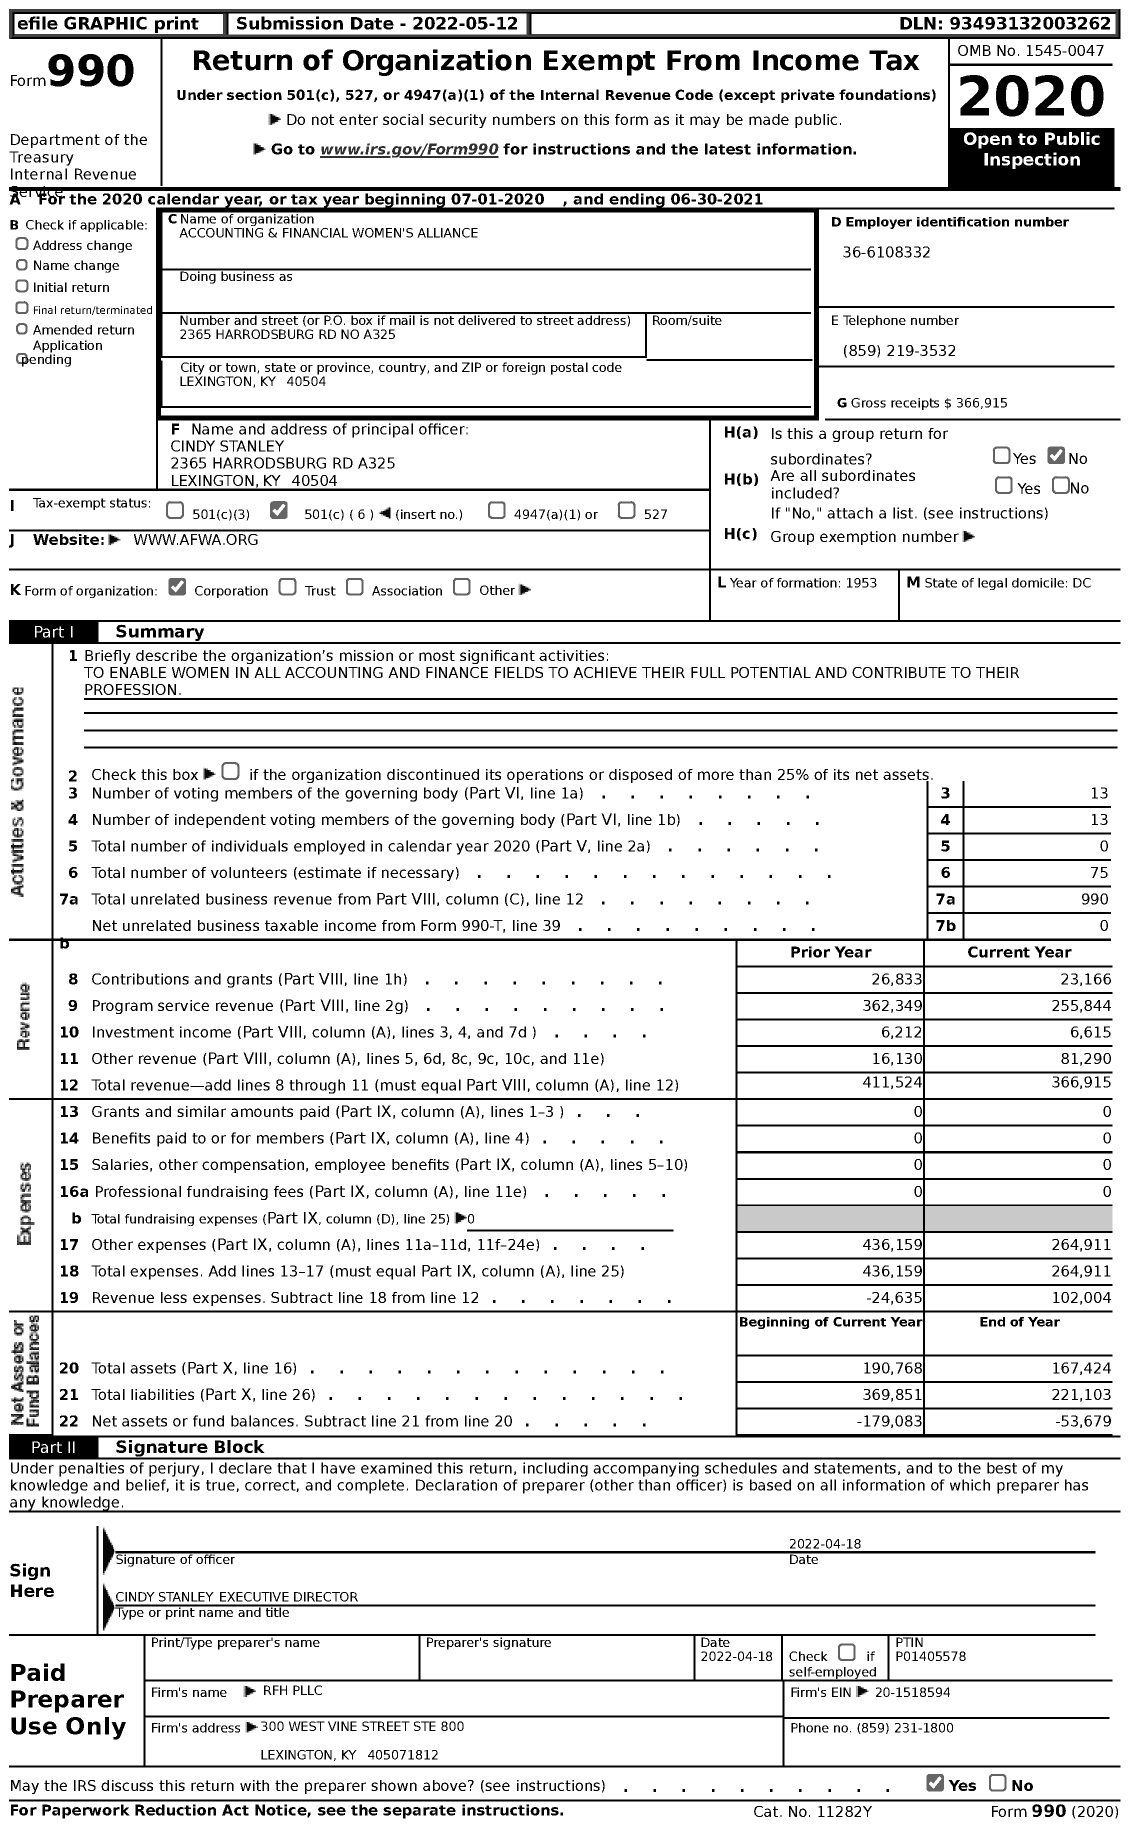 Image of first page of 2020 Form 990 for Accounting and Financial Women's Alliance